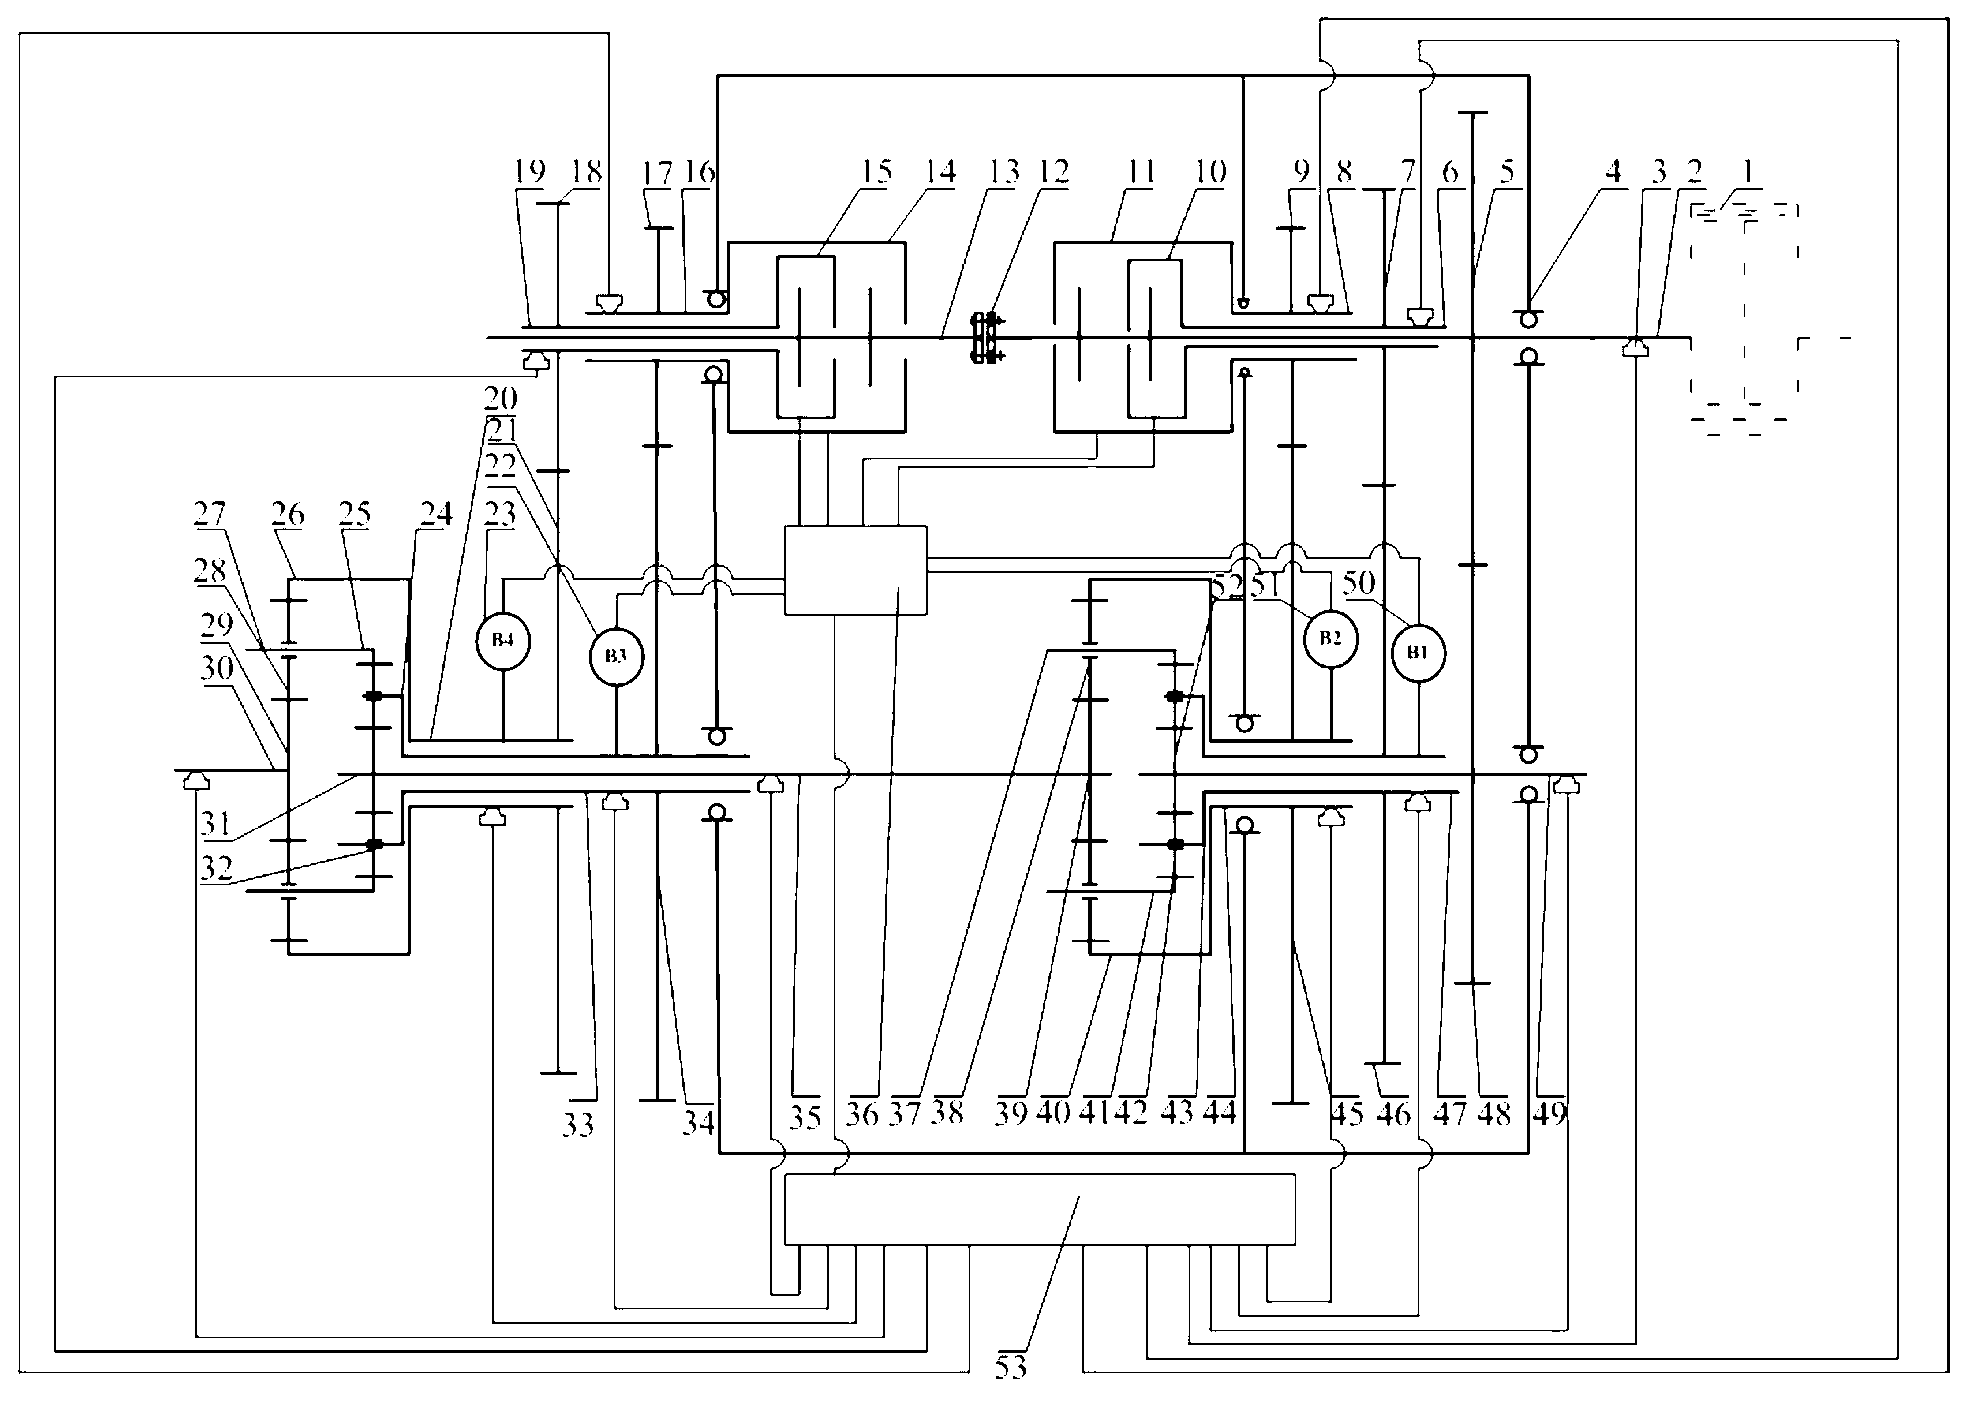 Double-planet-row converging type multi-clutch speed variator